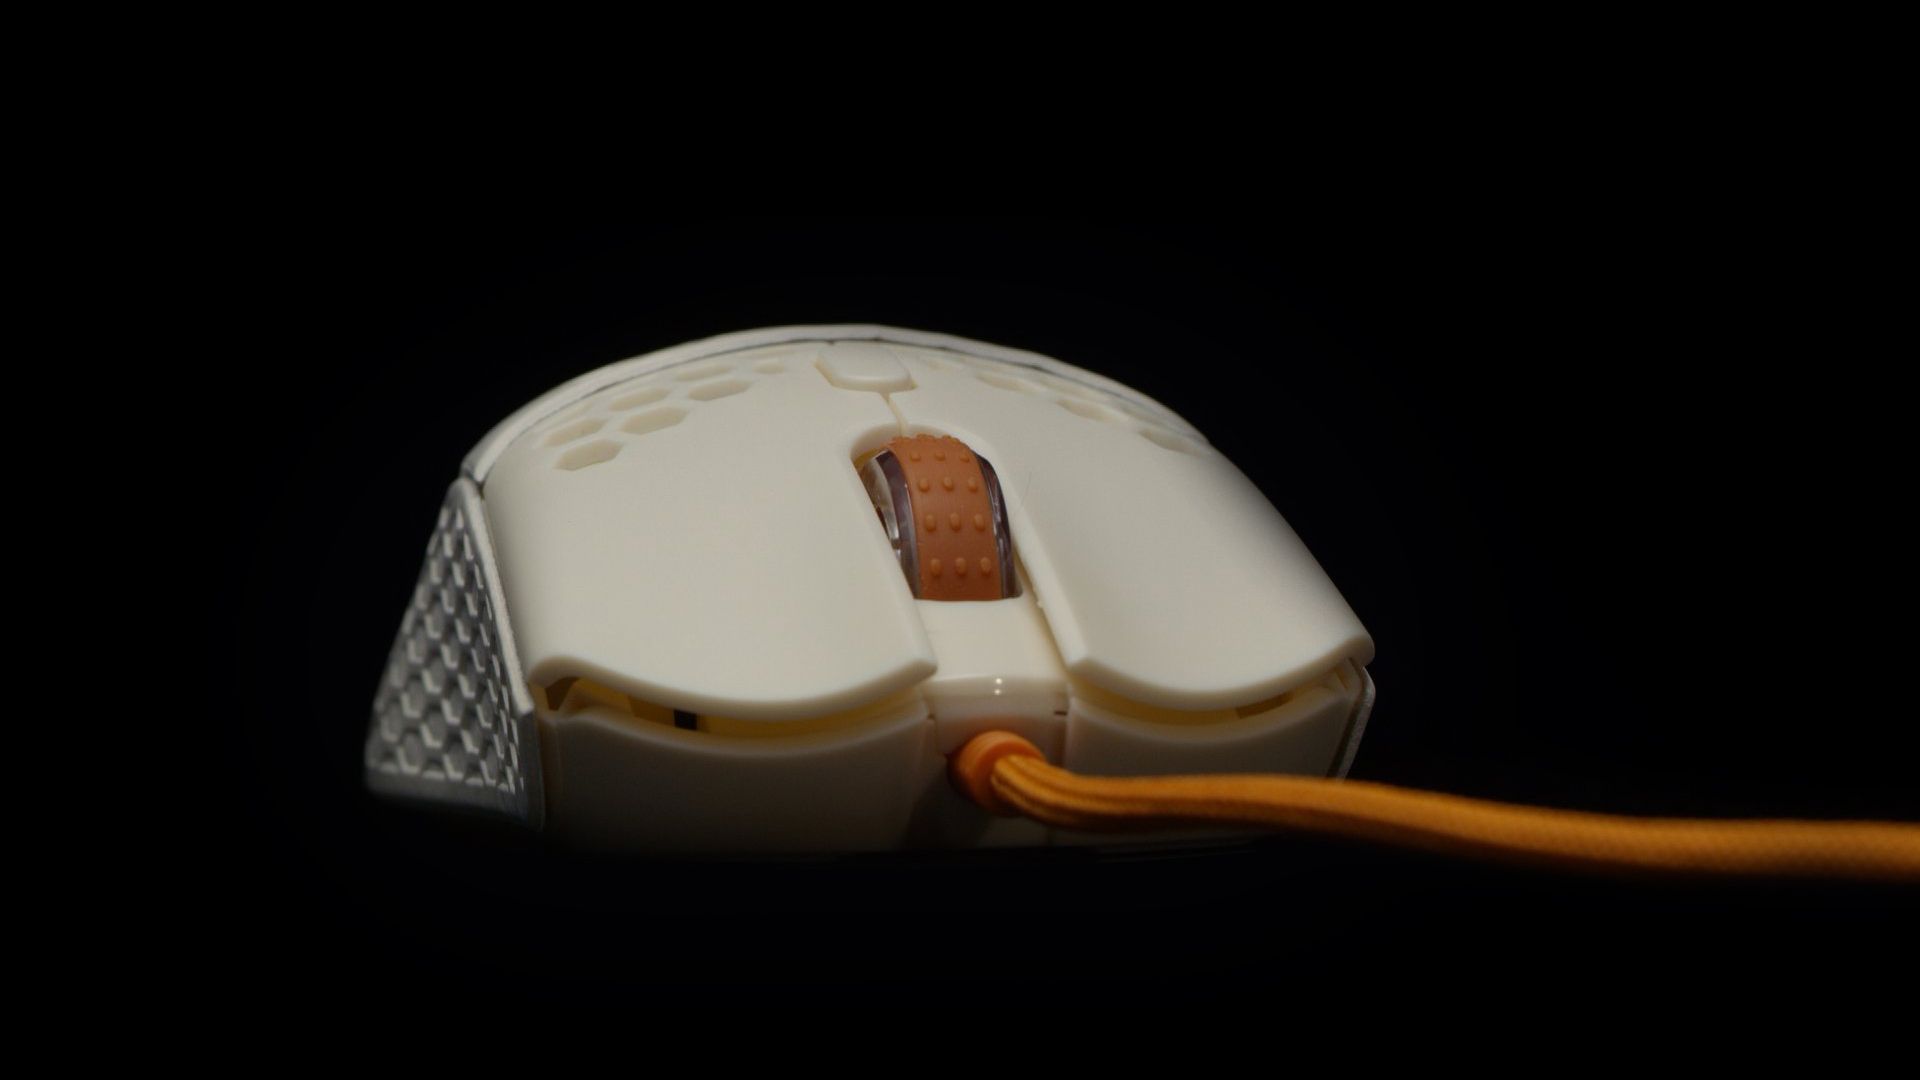 FinalMouse-Ultralight-2-Cape-Town-002